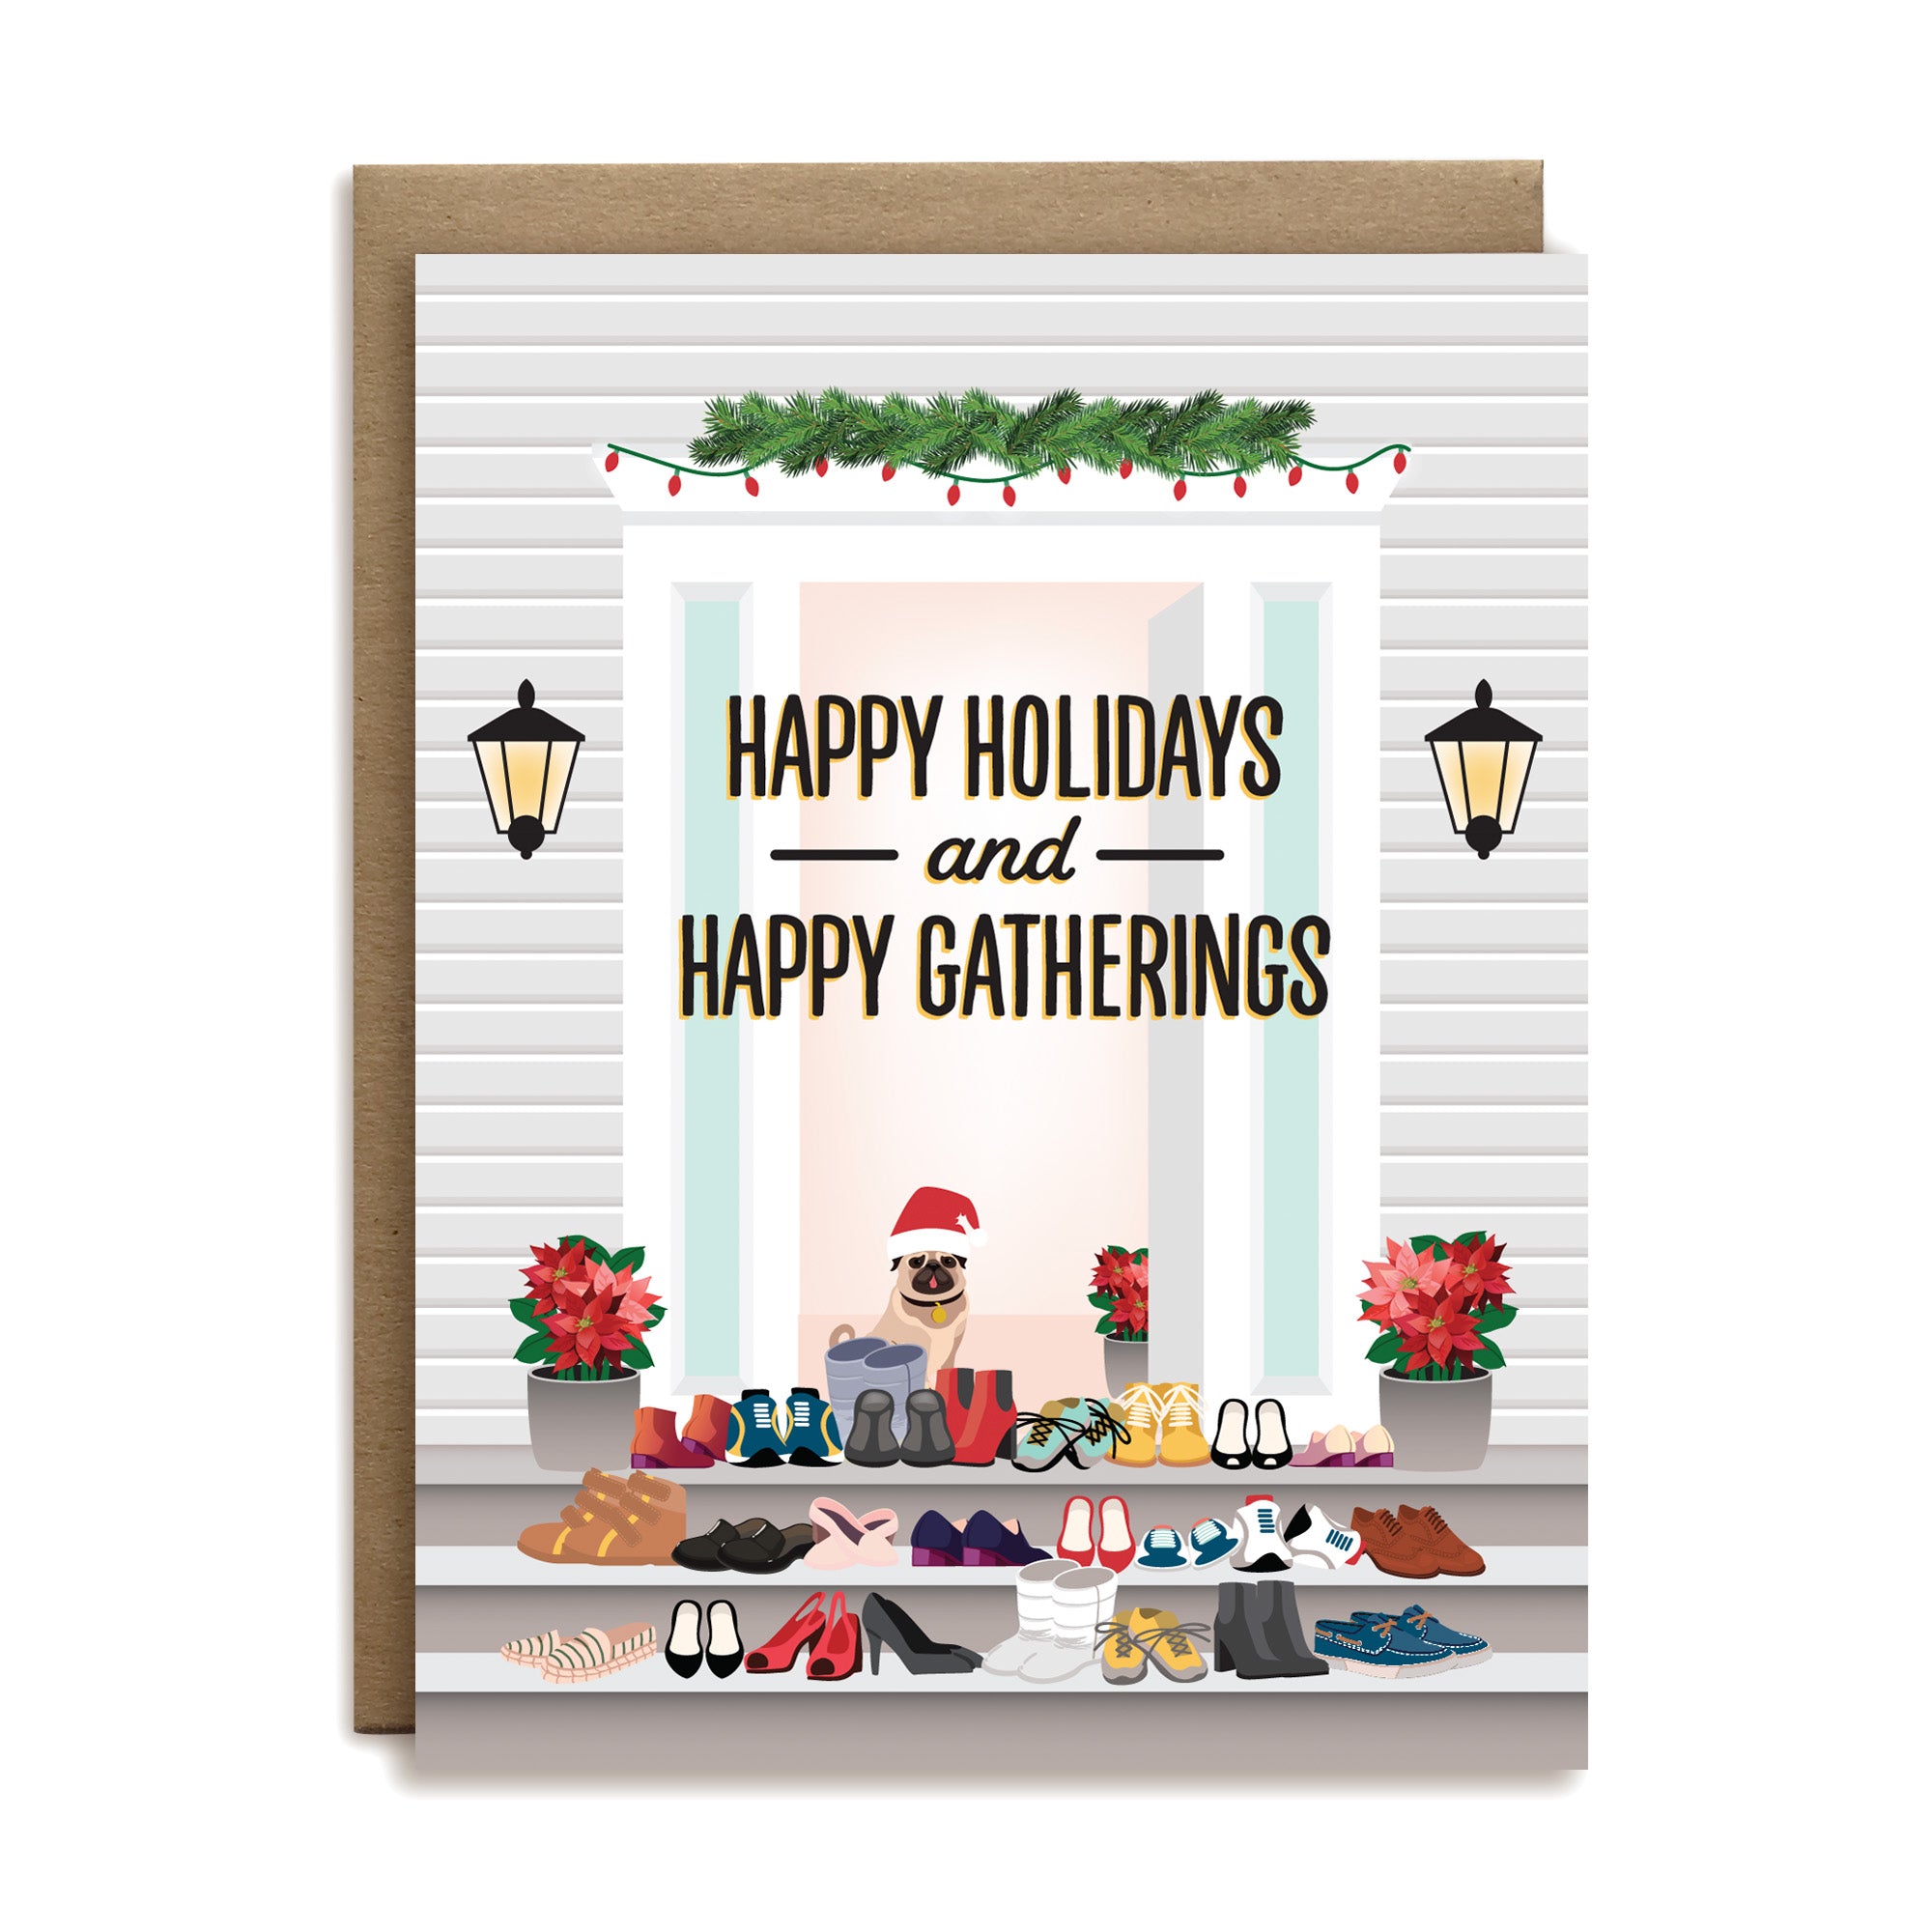 Happy holiday and Happy gatherings, leave shoes at the door holiday greeting card by I’ll Know It When I See It